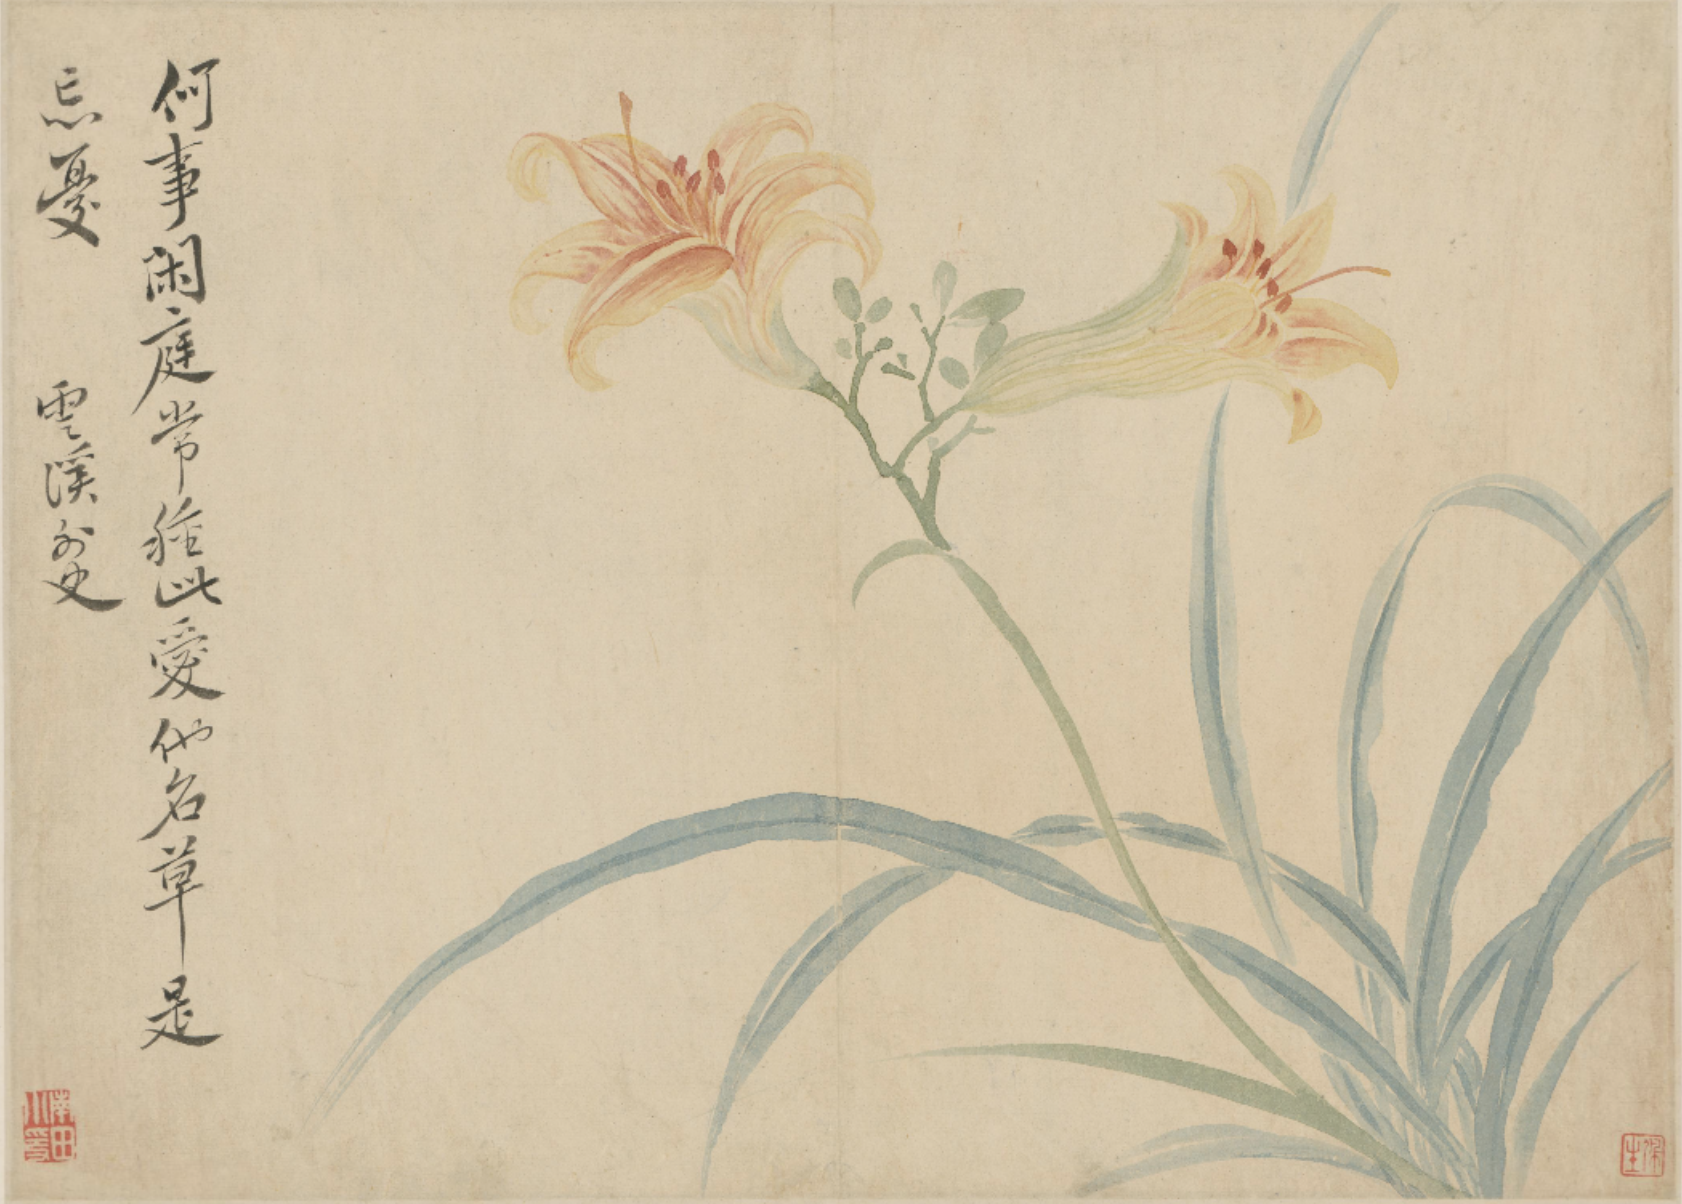 Qing Dynasty, Yun Shouping, Xuanhua This painting is selected from Yun Shouping's "Flower Album" in the Palace Museum